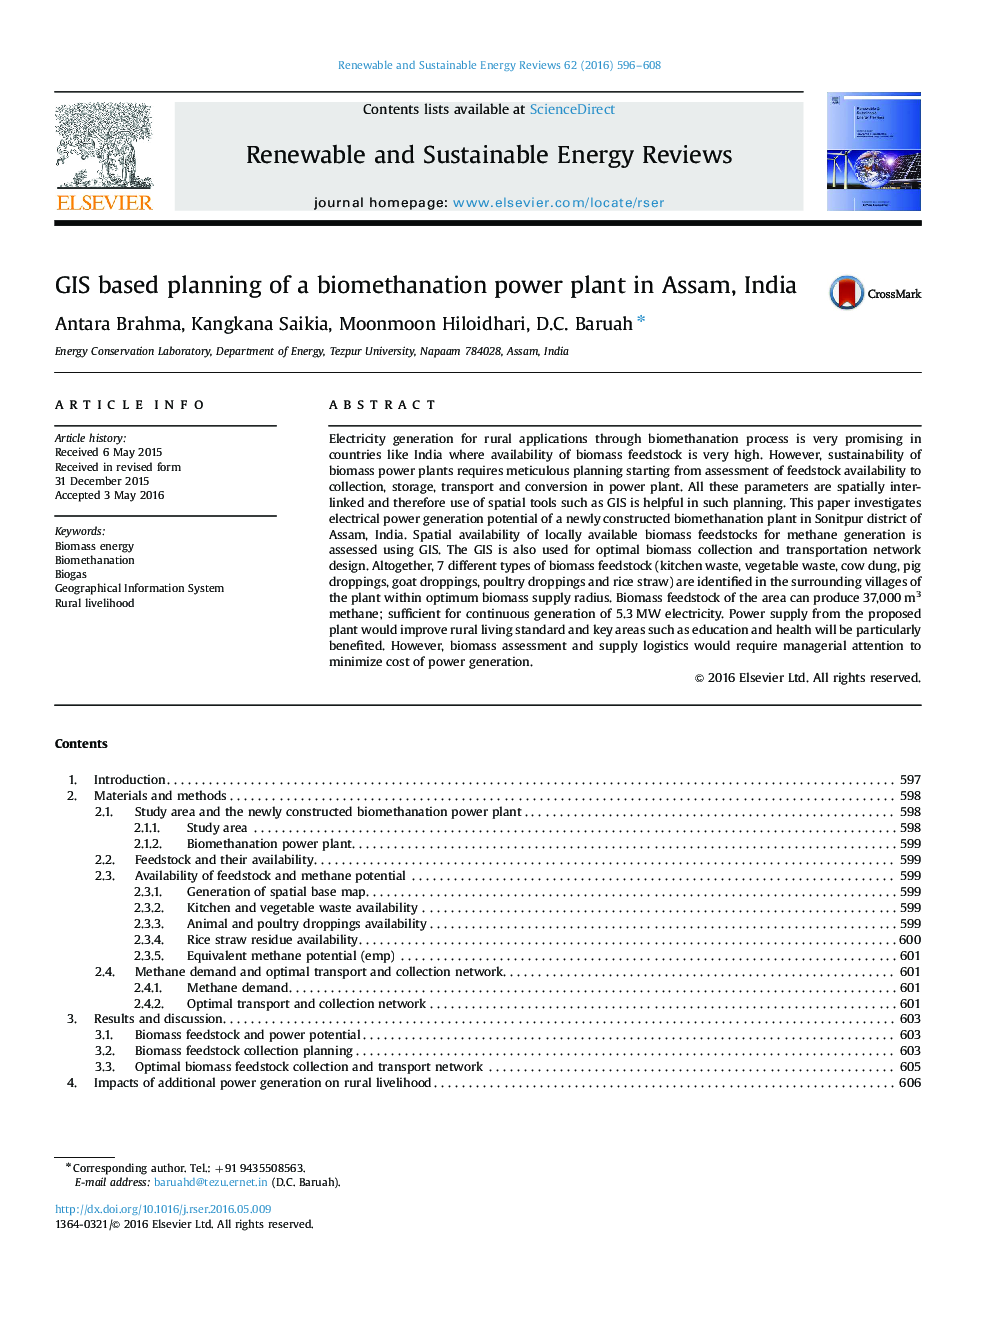 GIS based planning of a biomethanation power plant in Assam, India